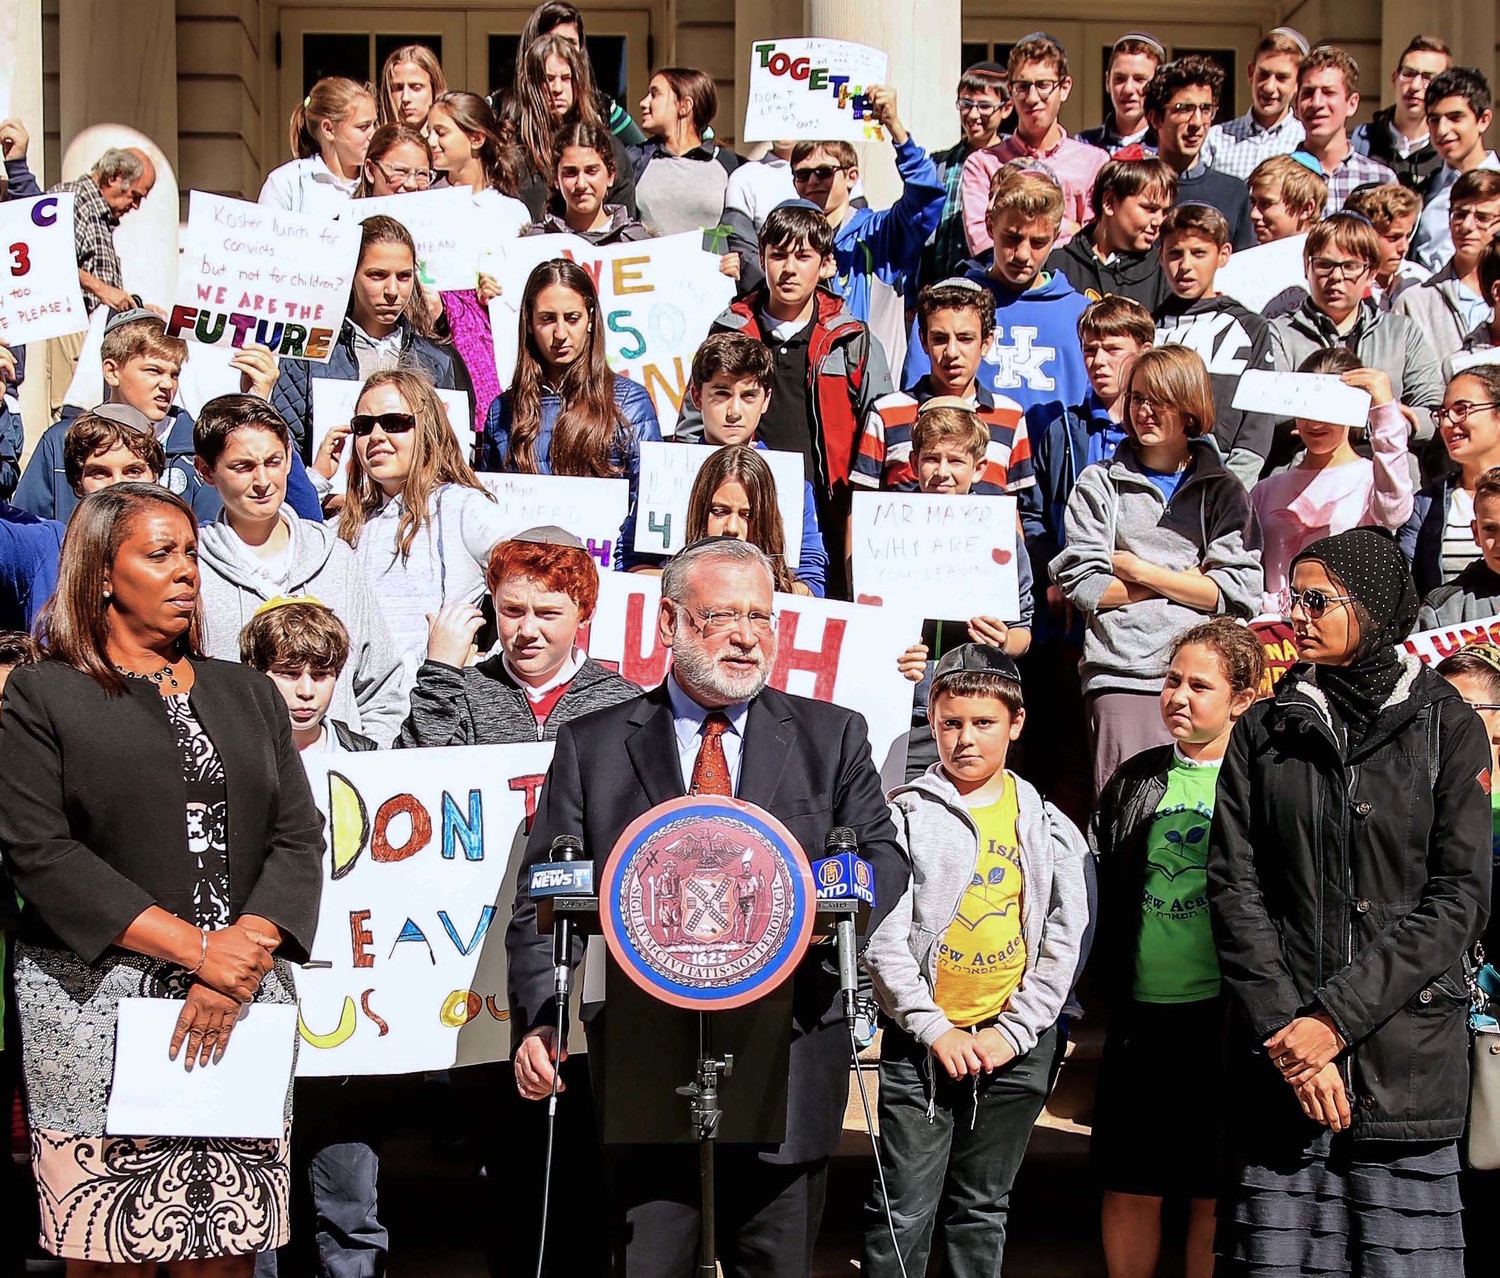 Manhattan Day School students stand behind Orthodox Union Executive Vice President Allen Fagin during a City Hall rally. They asked Mayor deBlasio to include Jewish and Muslim students in the city’s “Free Lunch for All” program, which does not yet offer kosher and halal options. City Councilwoman Leticia James, who spoke at the rally, is at left.